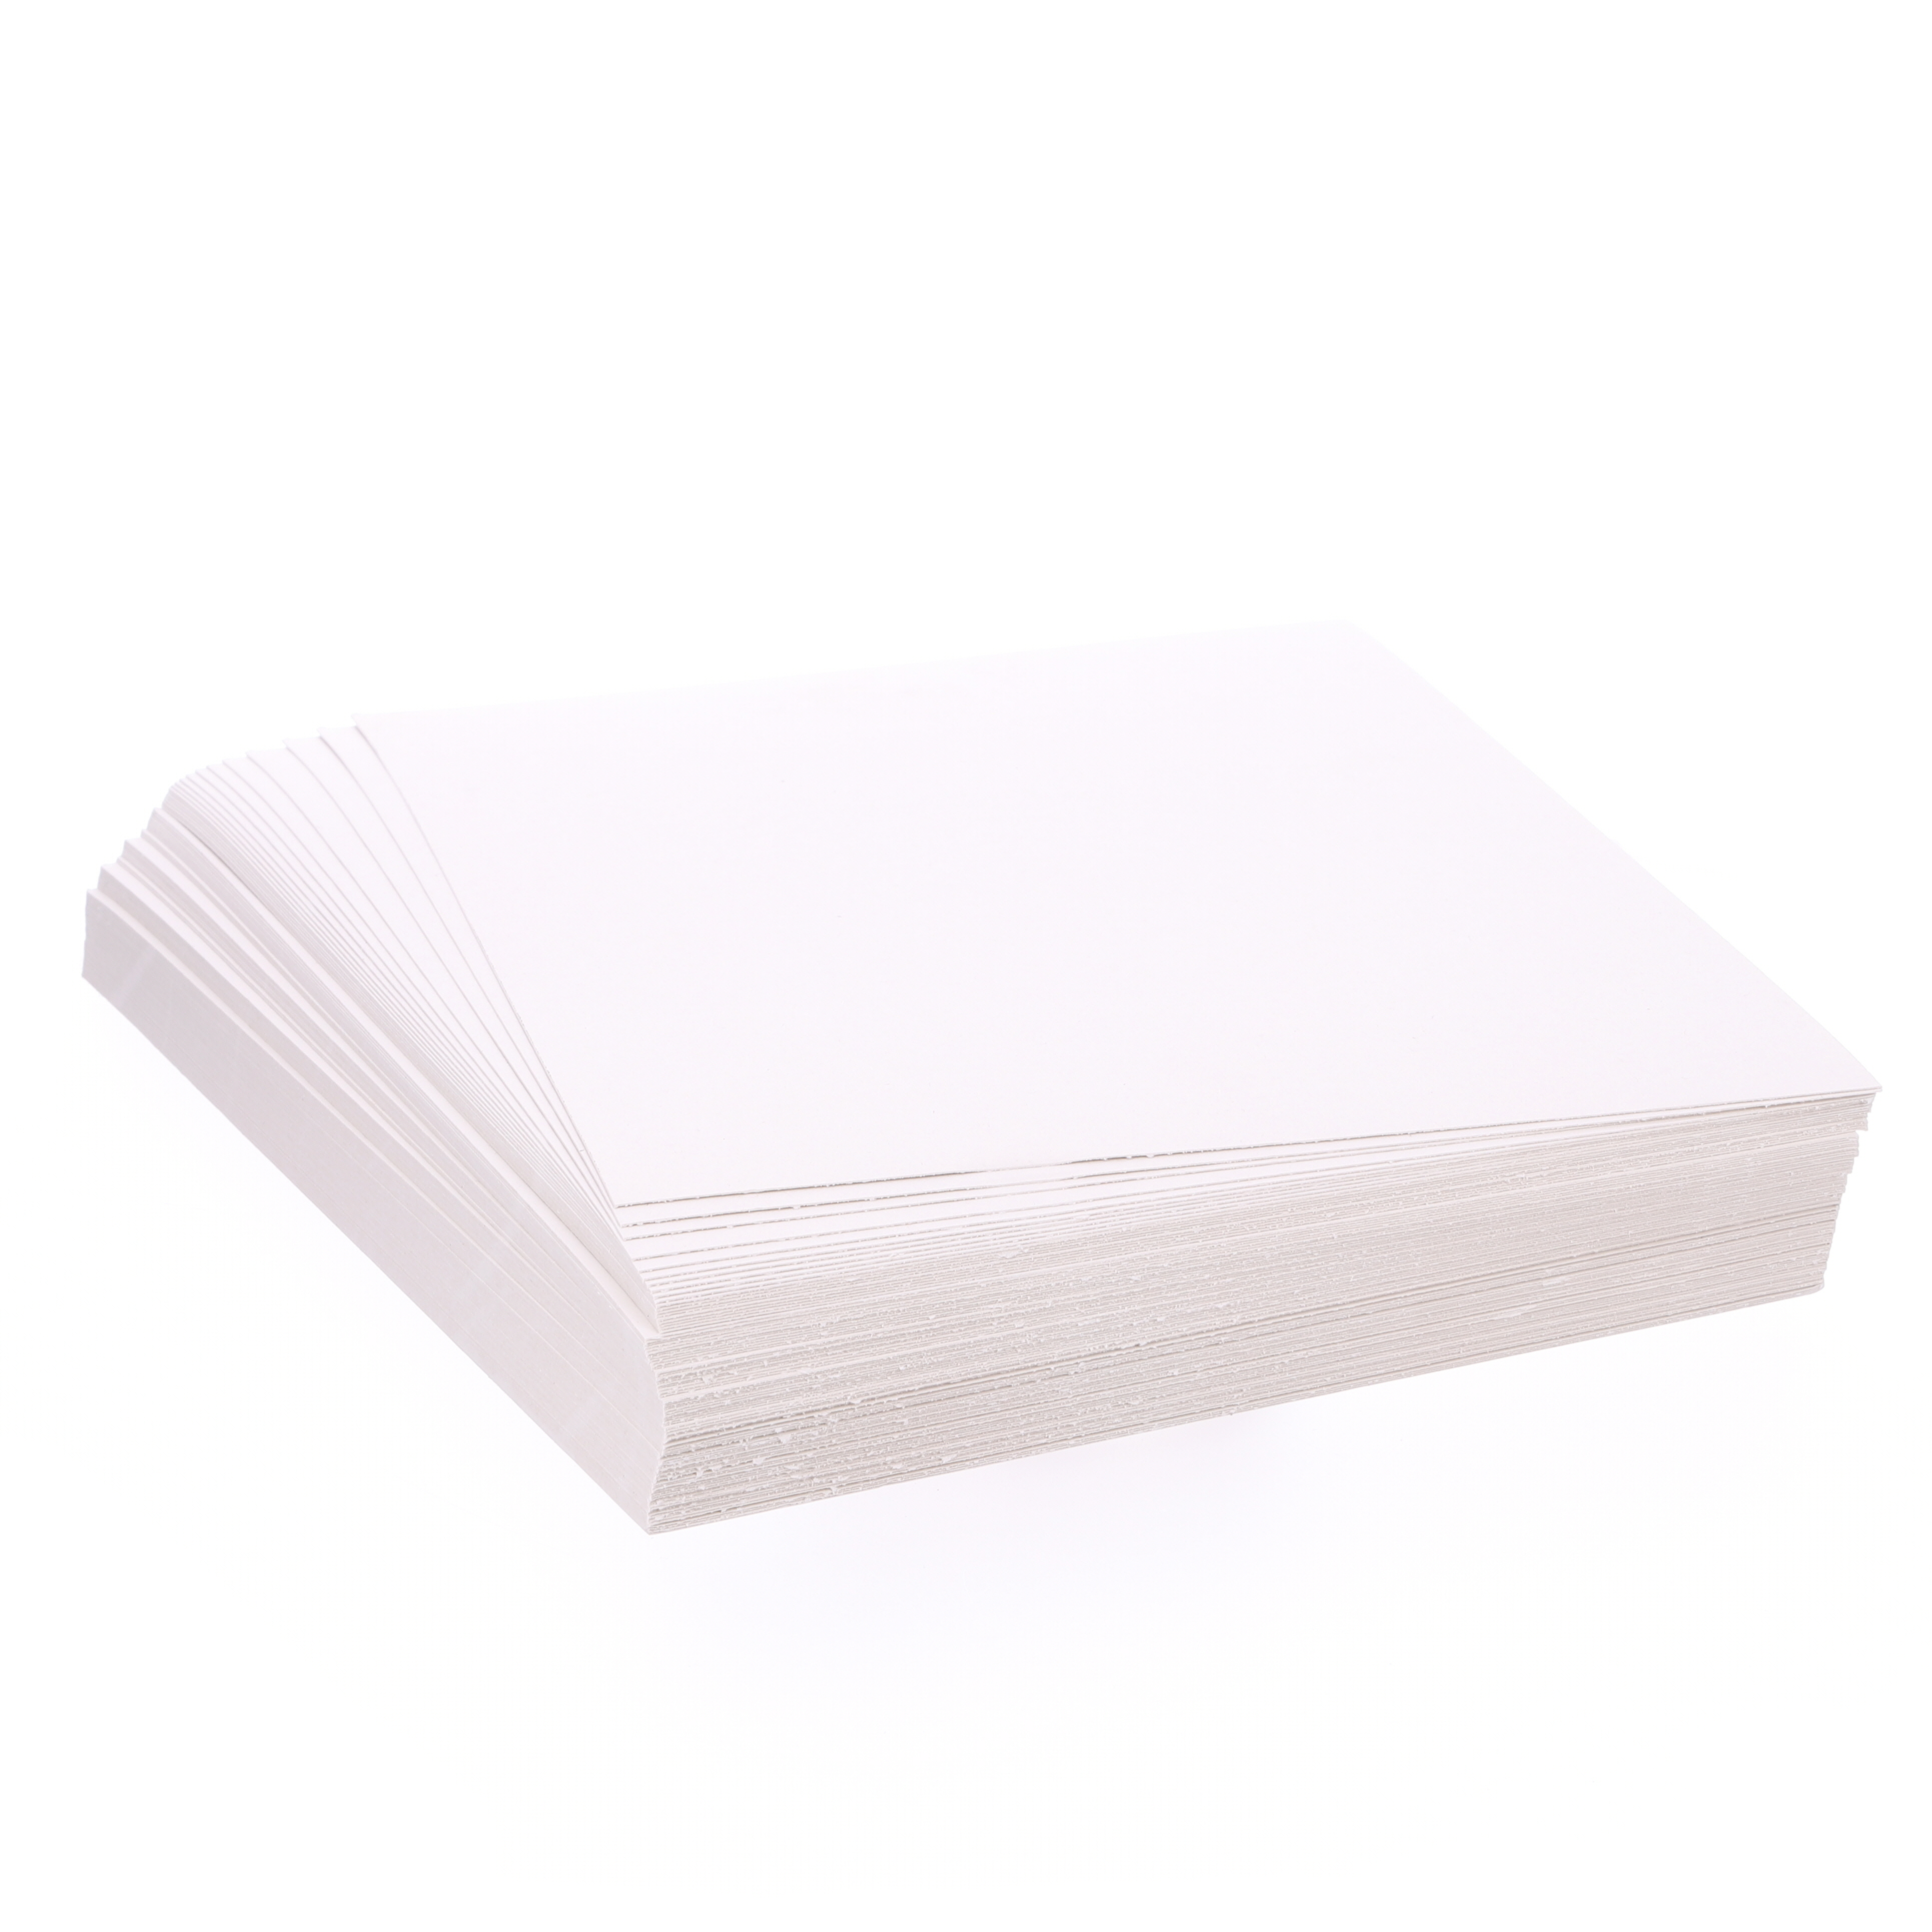 Off White Card 360 micron A4 100 Sheets